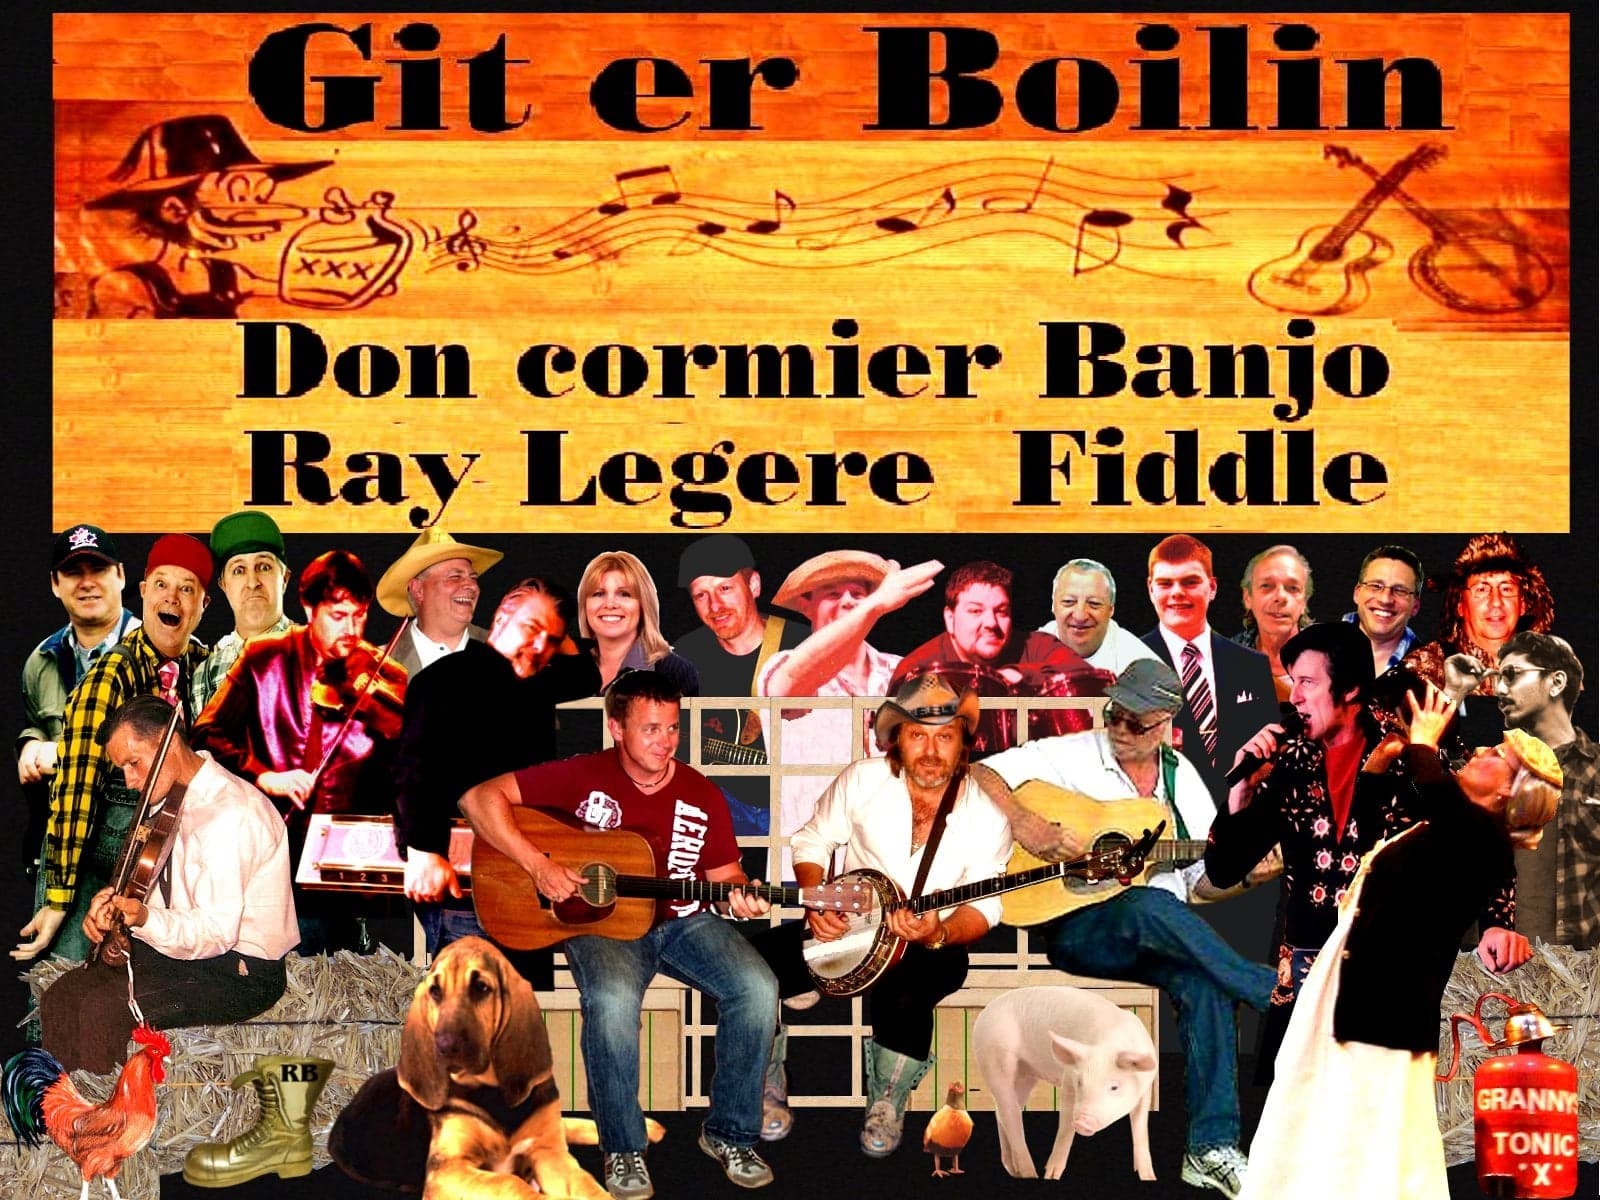 A large group of people on a stage with the Git er Boilin banner along the top.